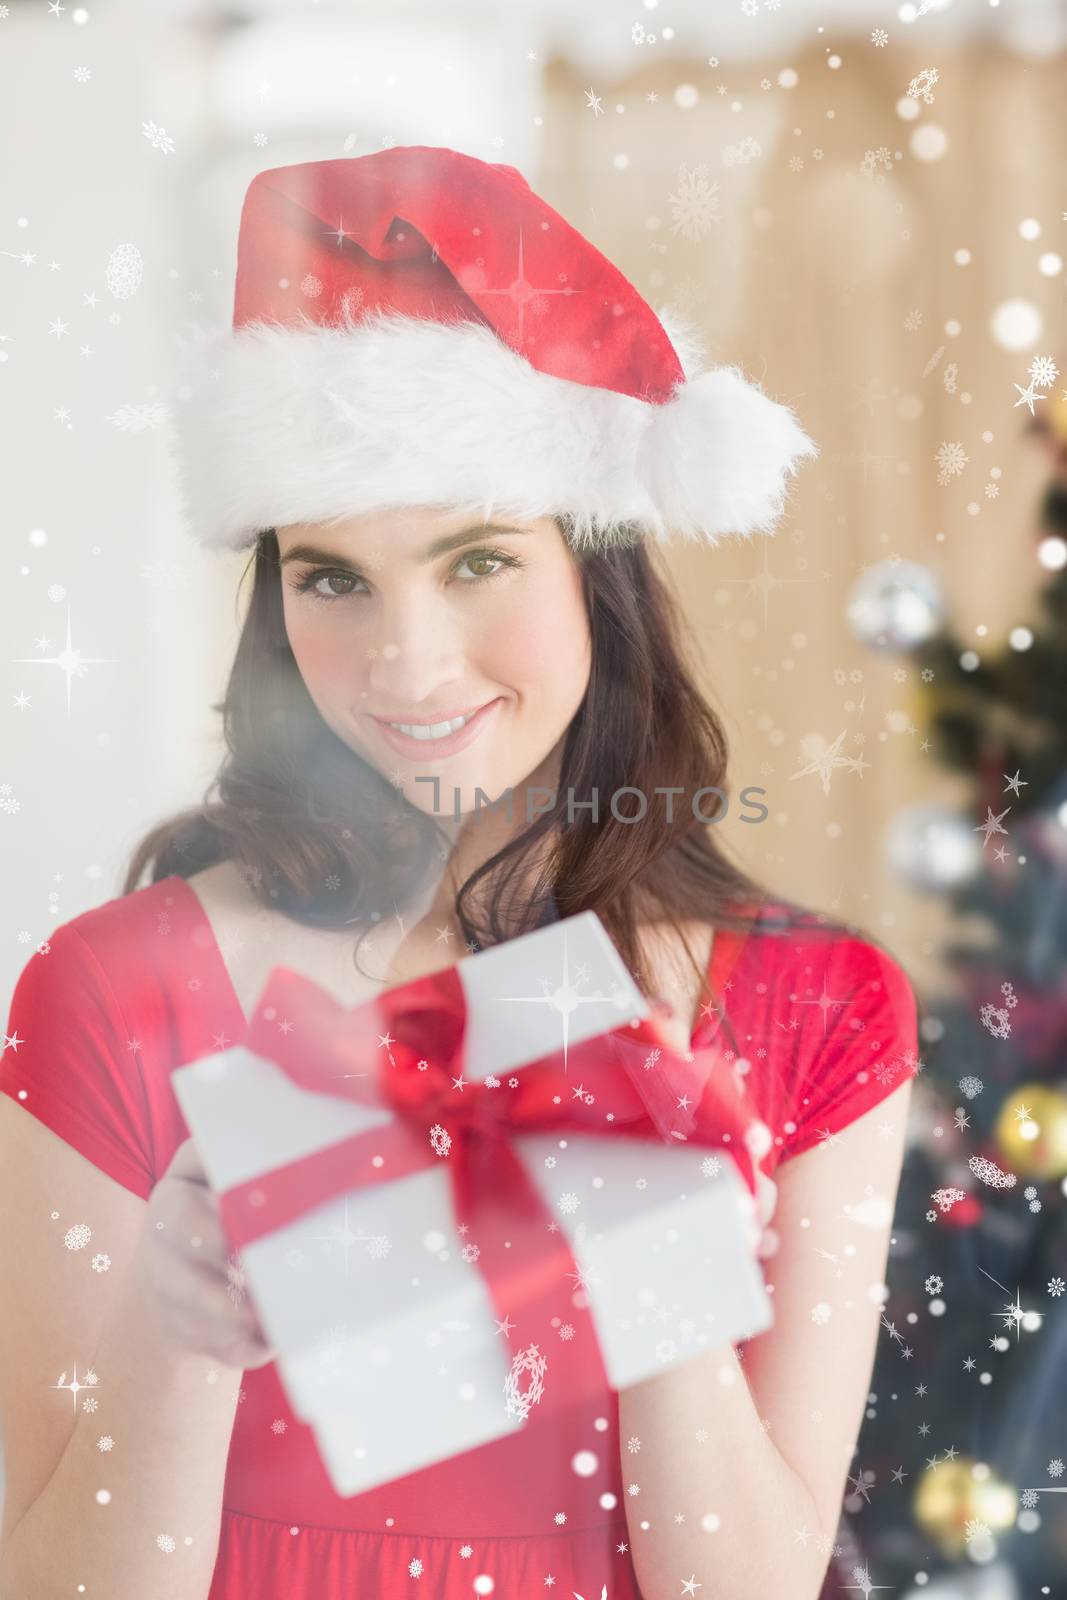 Beauty brunette showing gift at christmas against snow falling